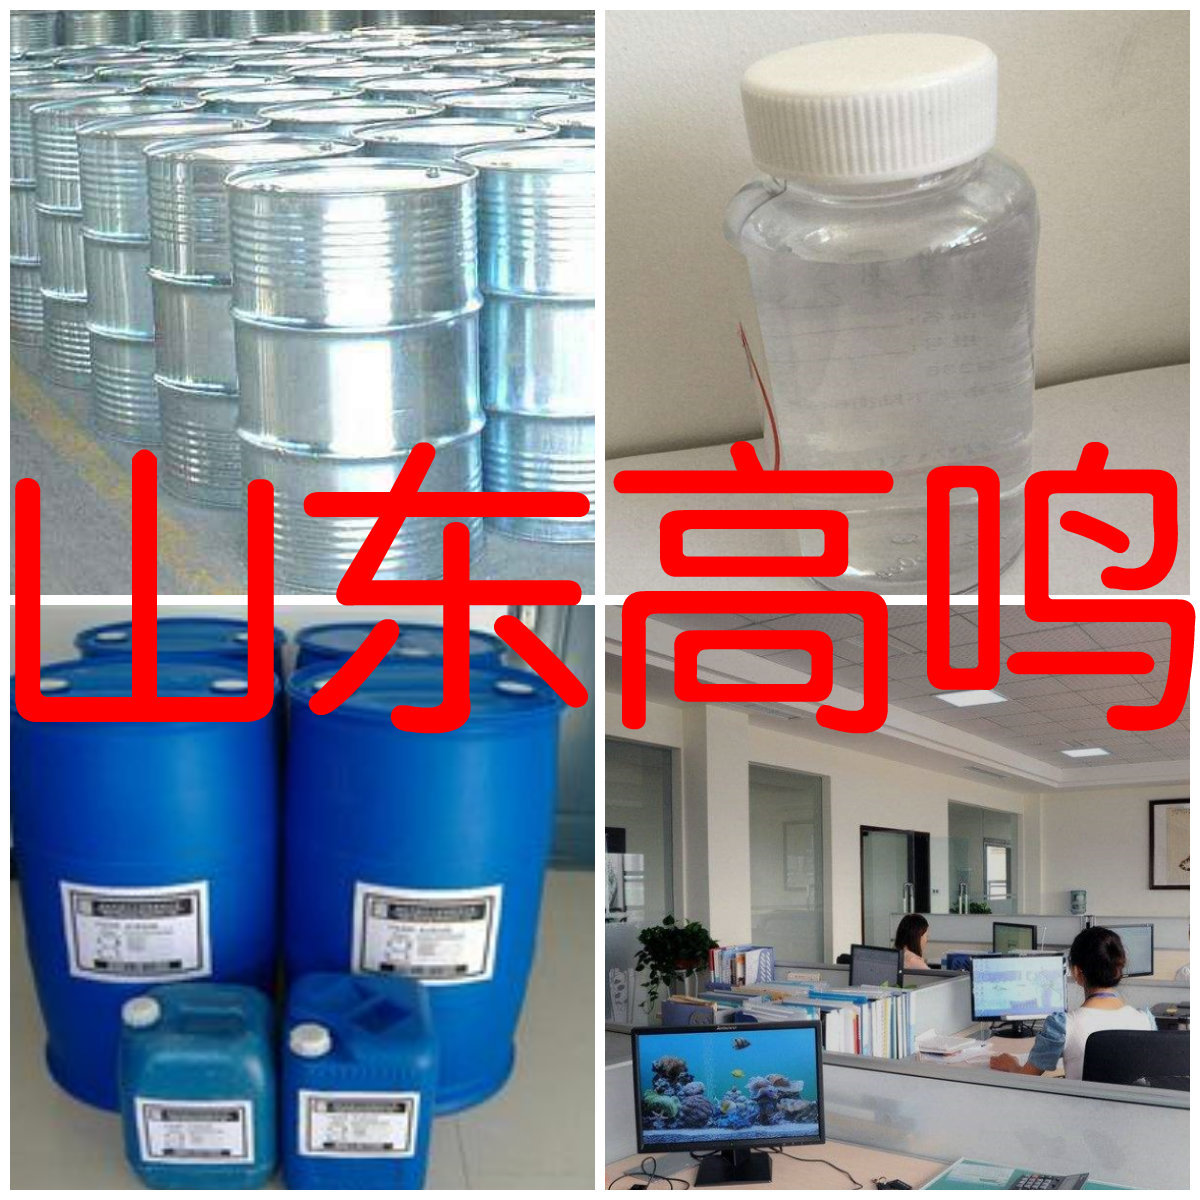 hydroxyl Benzaldehyde Reliable quality hydroxyl Benzaldehyde Specializing in the production Hebei Province